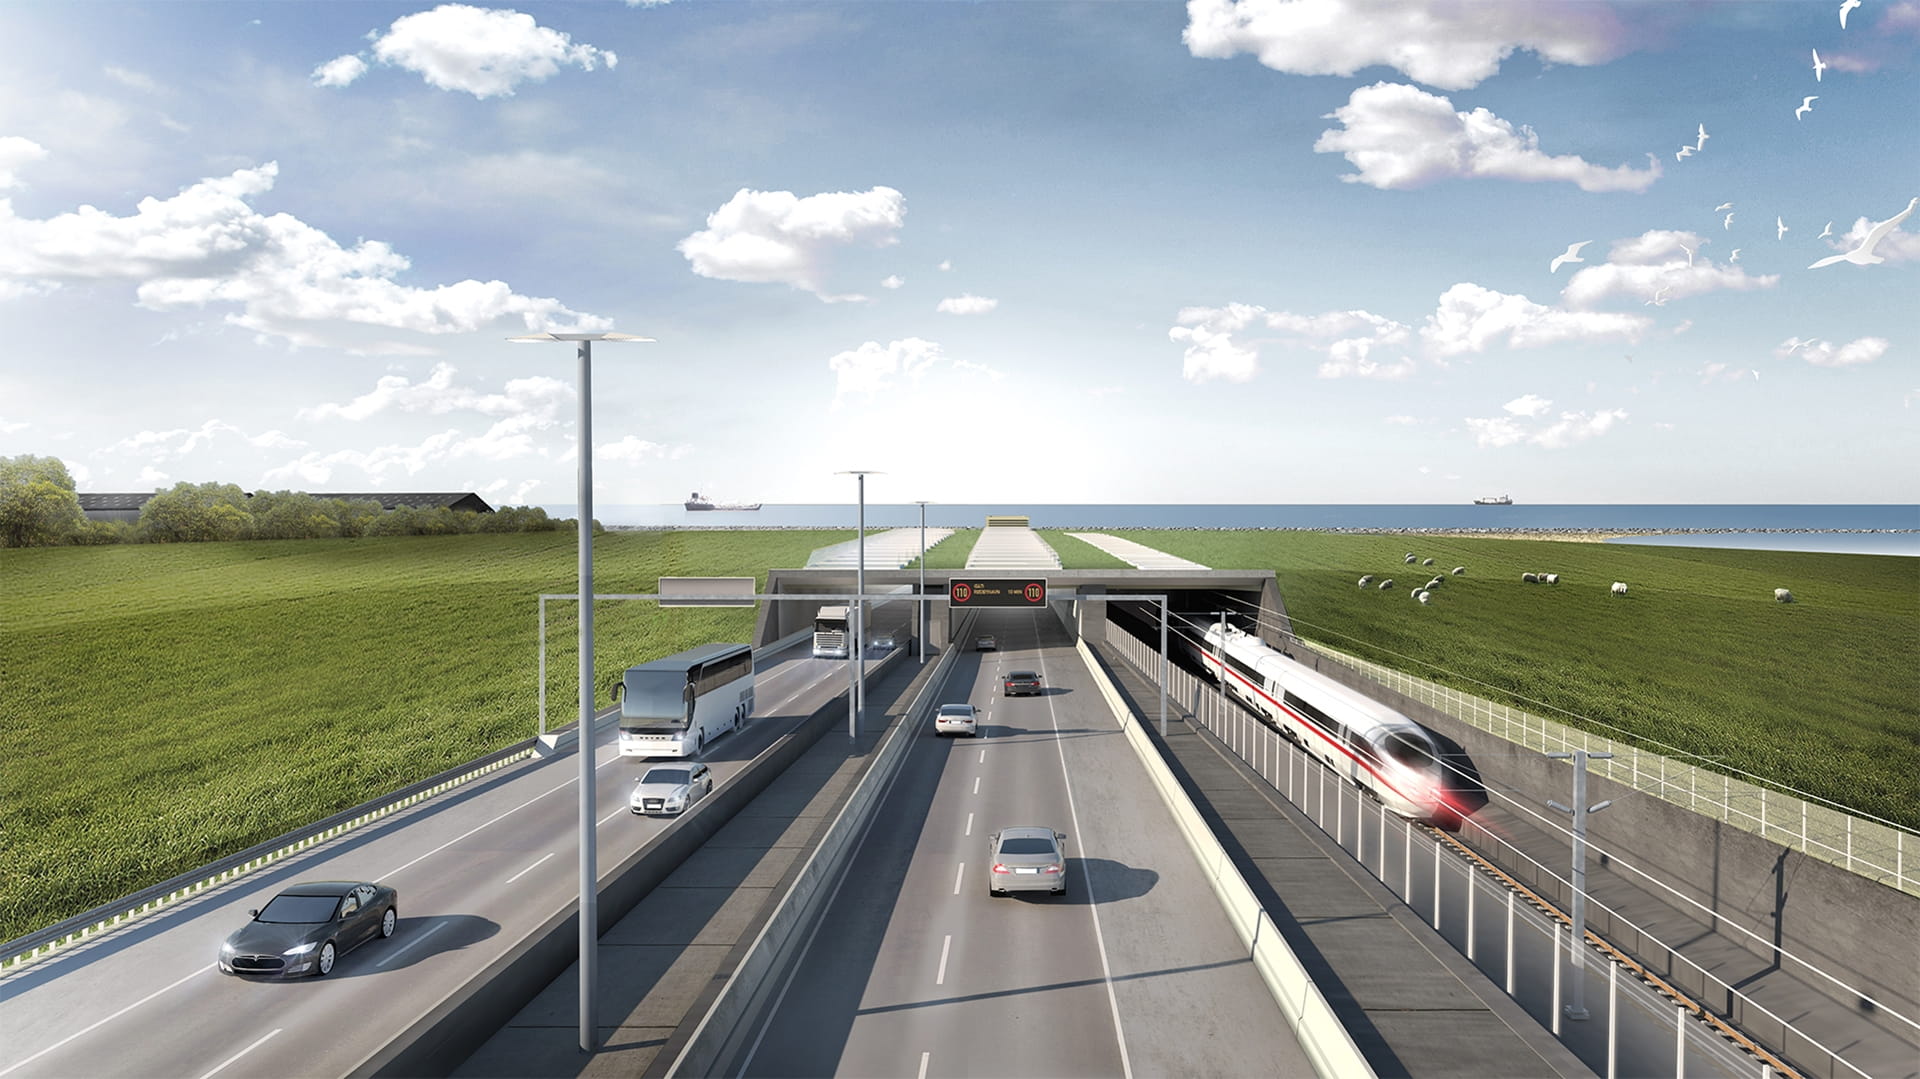 Artist impression of tunnel portal with cars